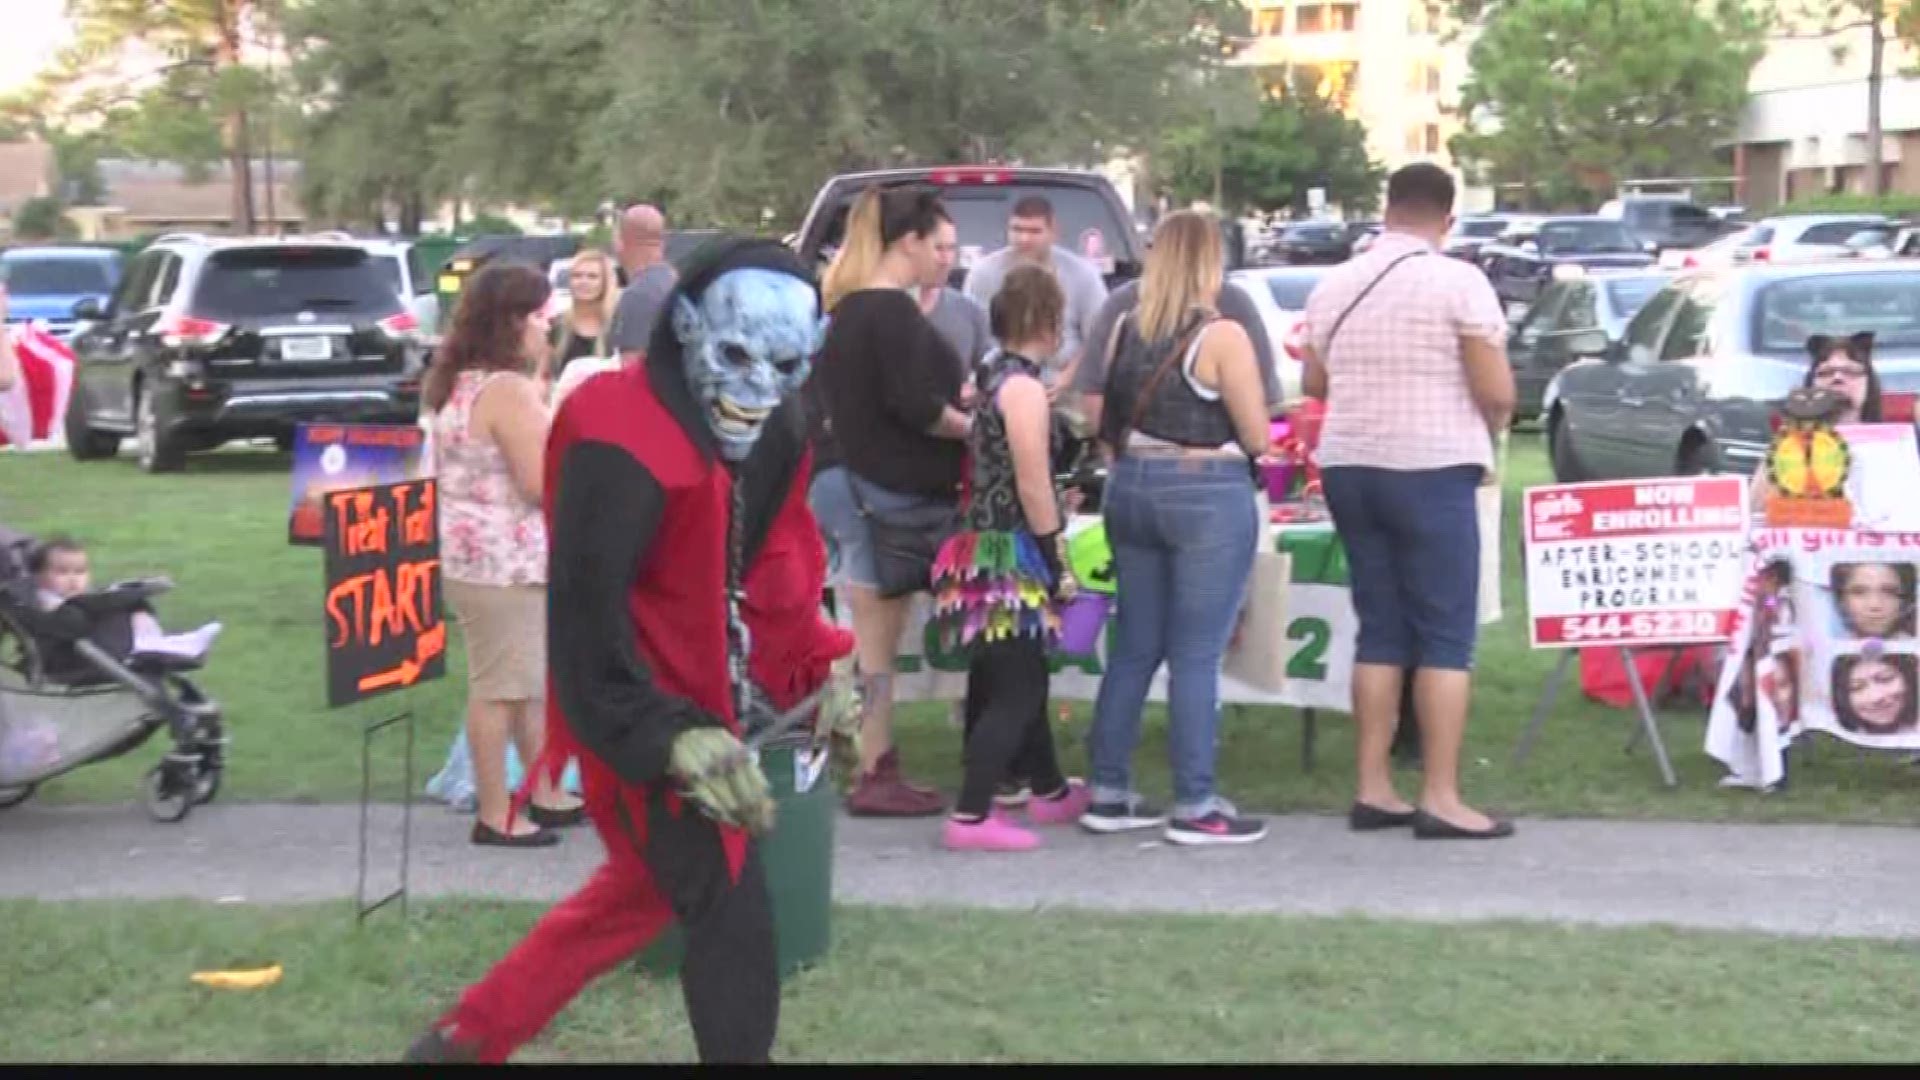 Jabari Thomas tells you about a big Halloween party in Pinellas Park.